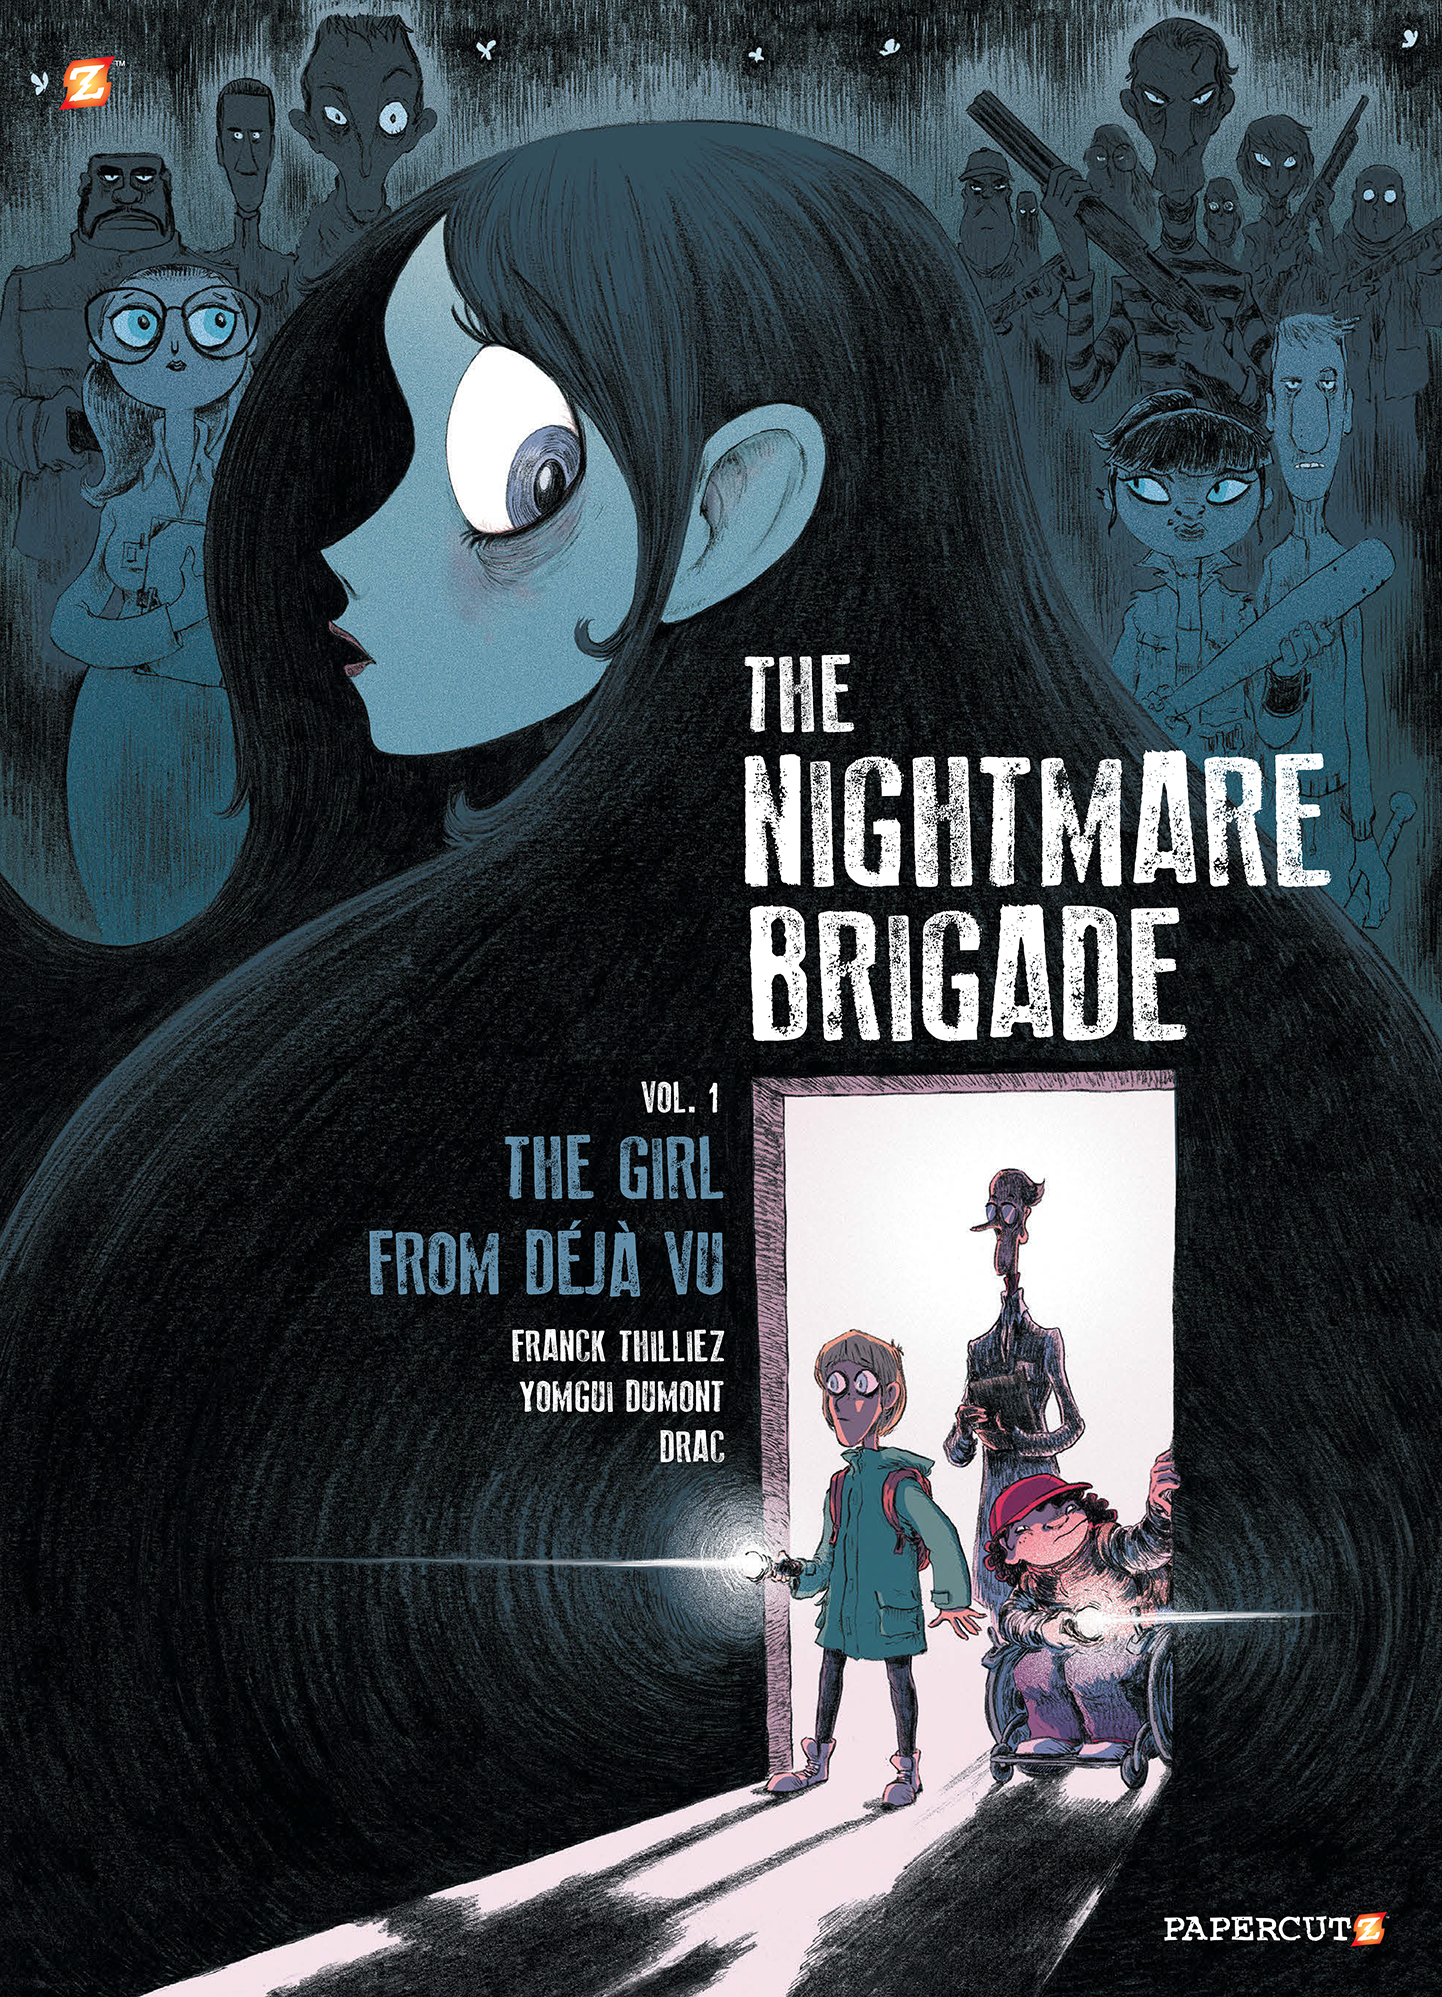 Read online The Nightmare Brigade comic -  Issue # TPB 1 - 1